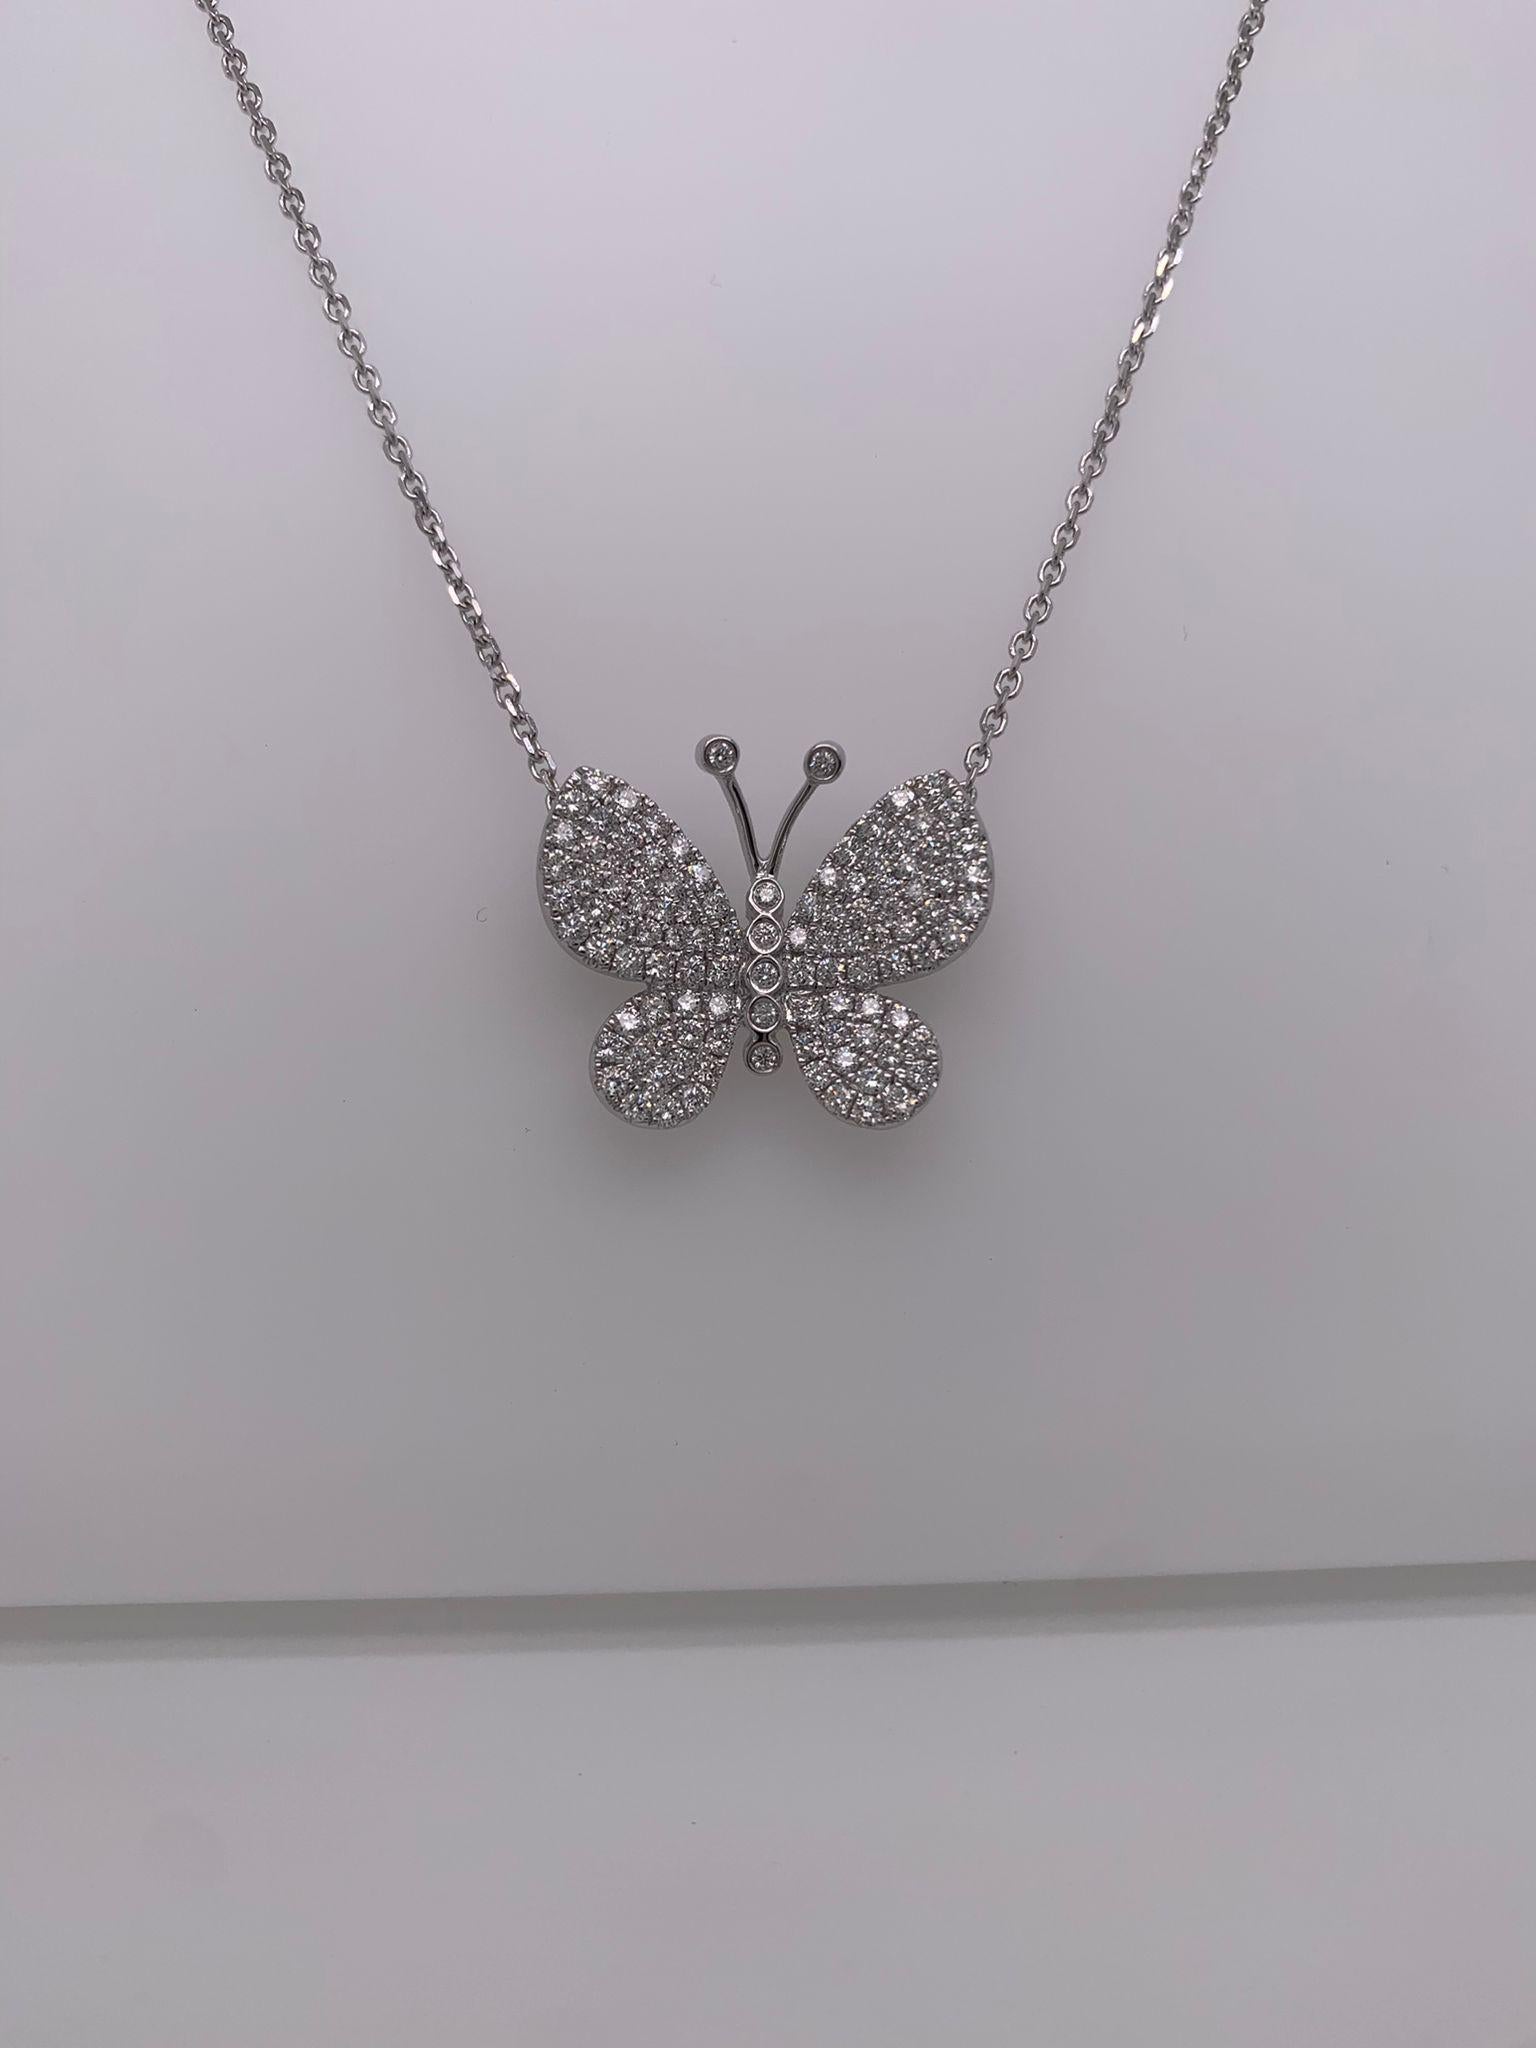 107 Pieces of diamonds weighing 1.17 carats
18K white gold
Weighing 6.70 grams
Butterfly Dimensions (21Wx17H) mm
